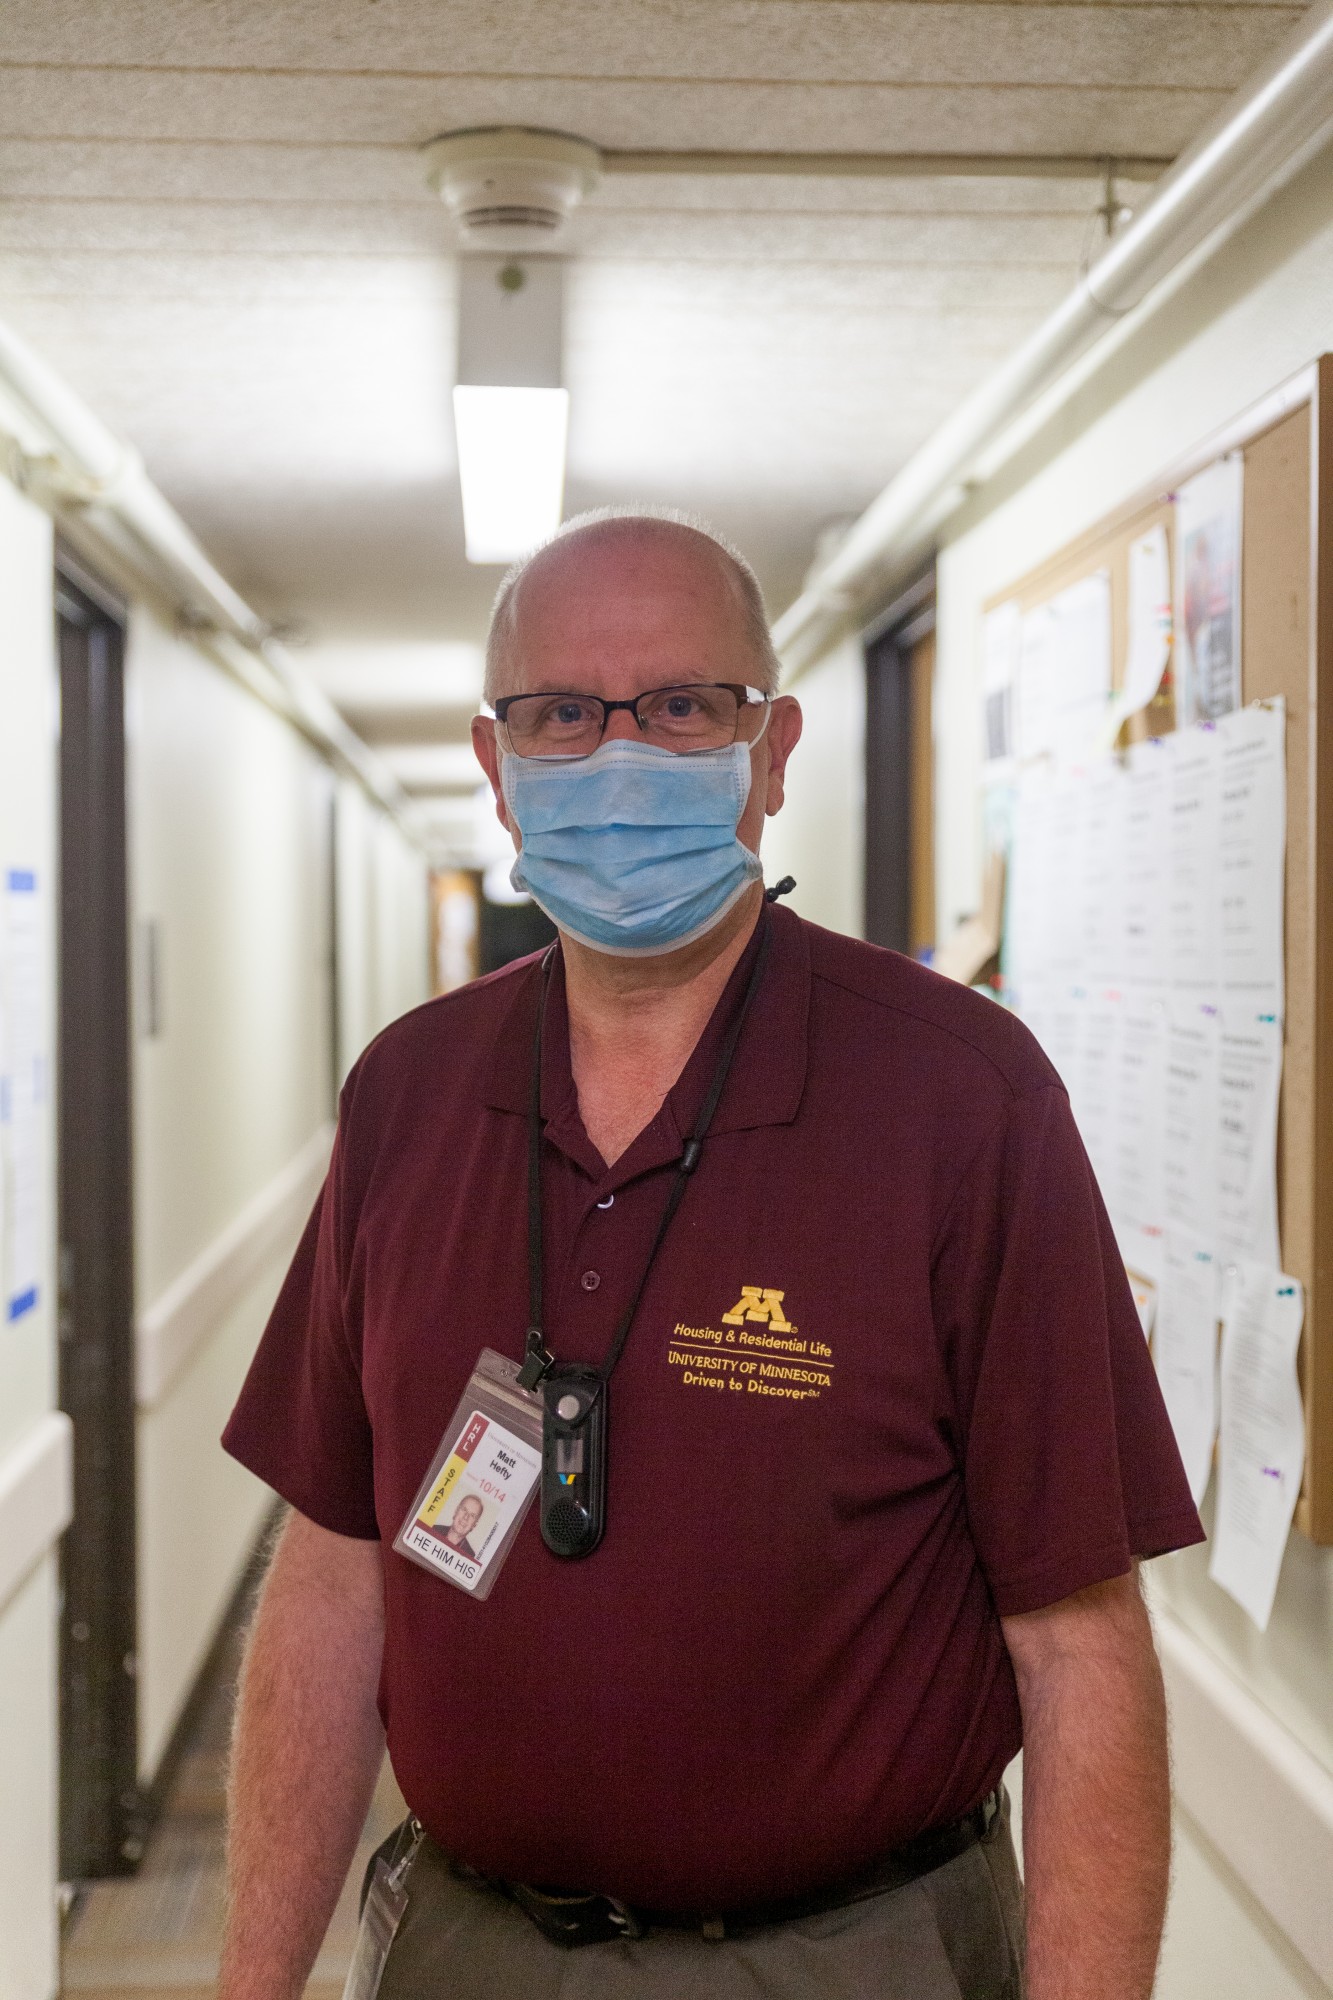 University of Minnesota Facilities Operations Supervisor Matt Hefty poses for a portrait at Territorial Hall, where he works, on Wednesday, May 6.